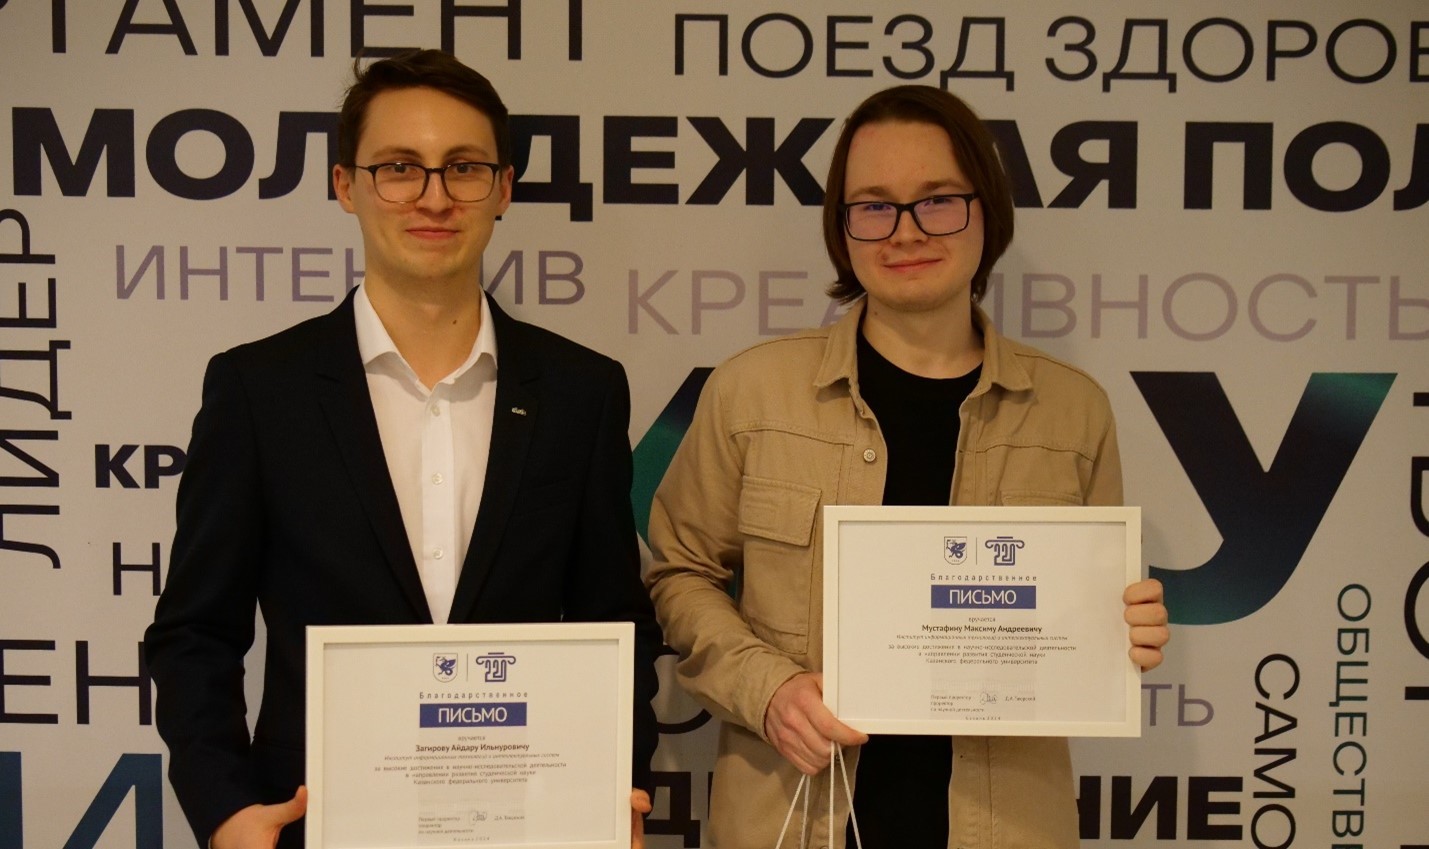 Laboratory of Intelligent Robotics Systems' members were awarded for their achievements in science ,ITIS, LIRS, robotics